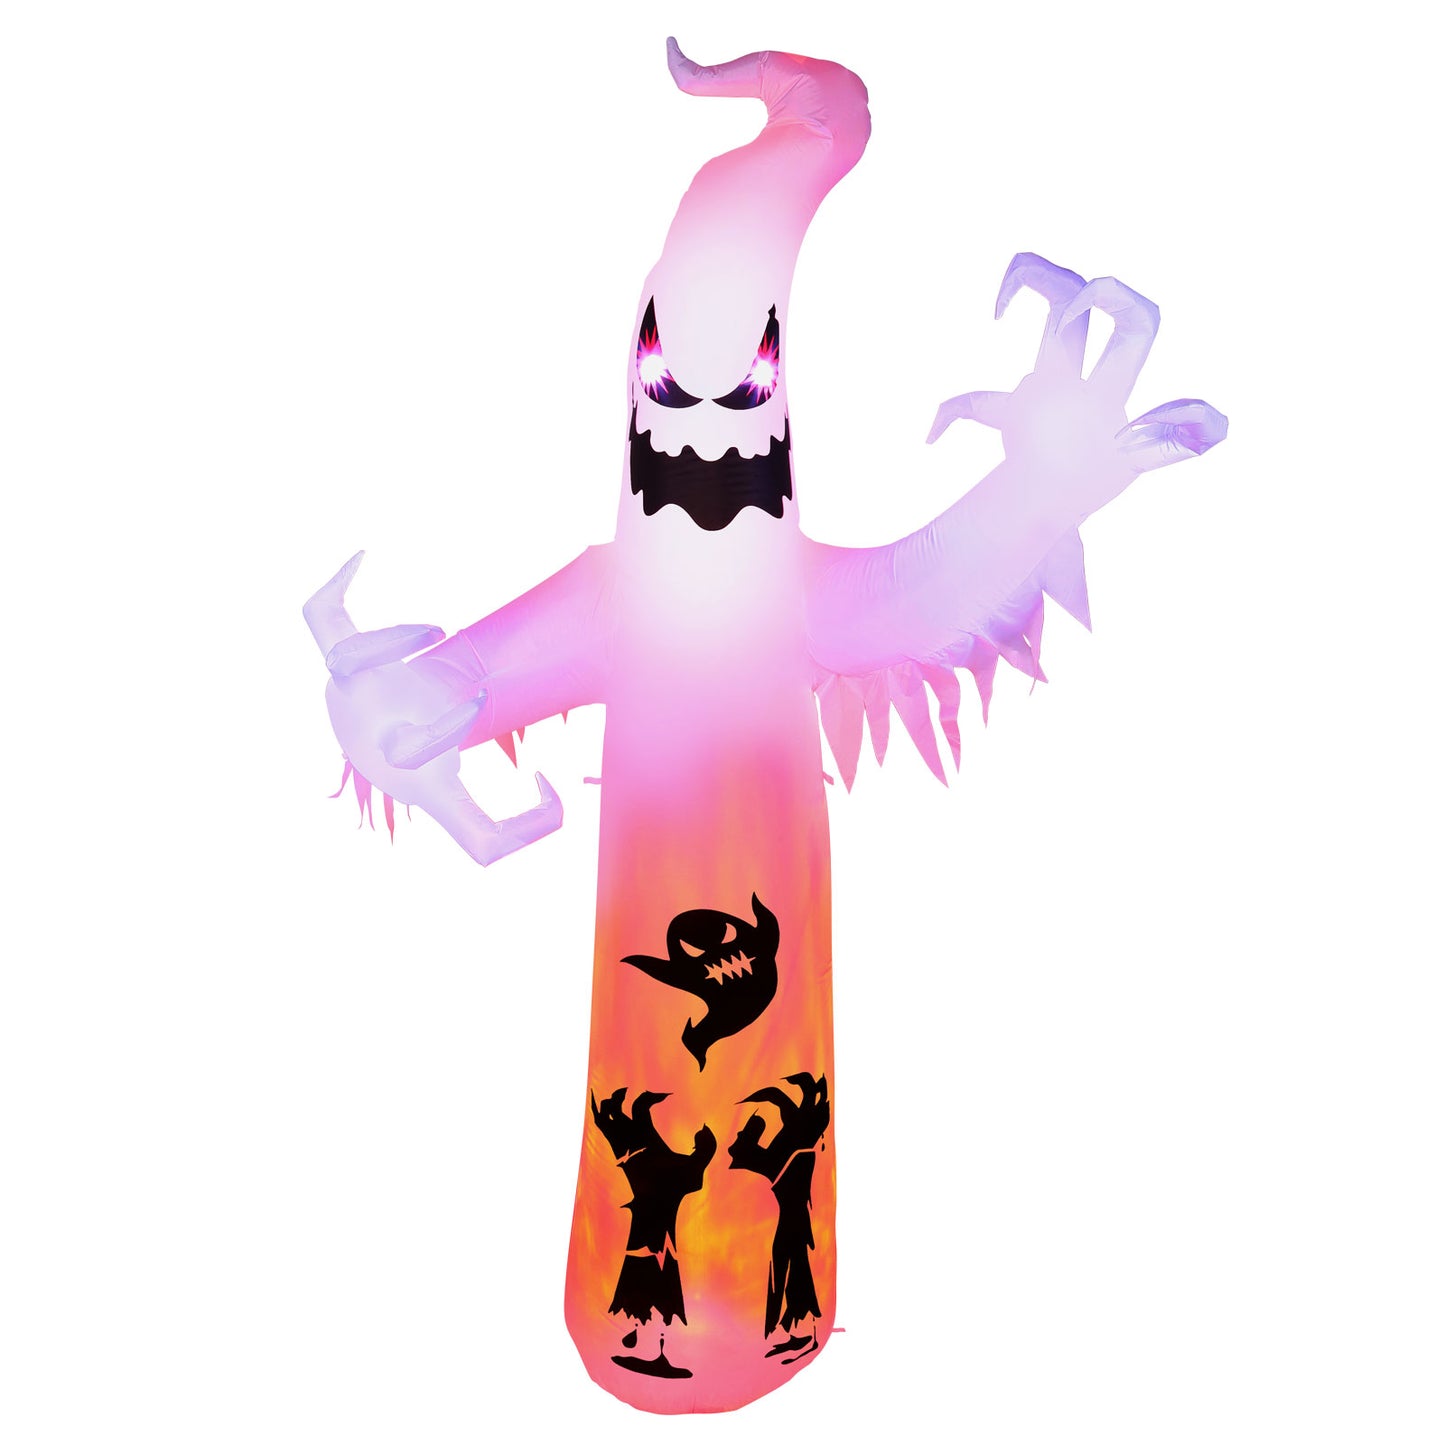 Halloween Inflatable Ghost, CAMULAND 8 FT Halloween White Ghost Inflatable Outdoor Decoration with Built-in Color Changing LED Lights, Great for Backyards, Gardens and Lawns